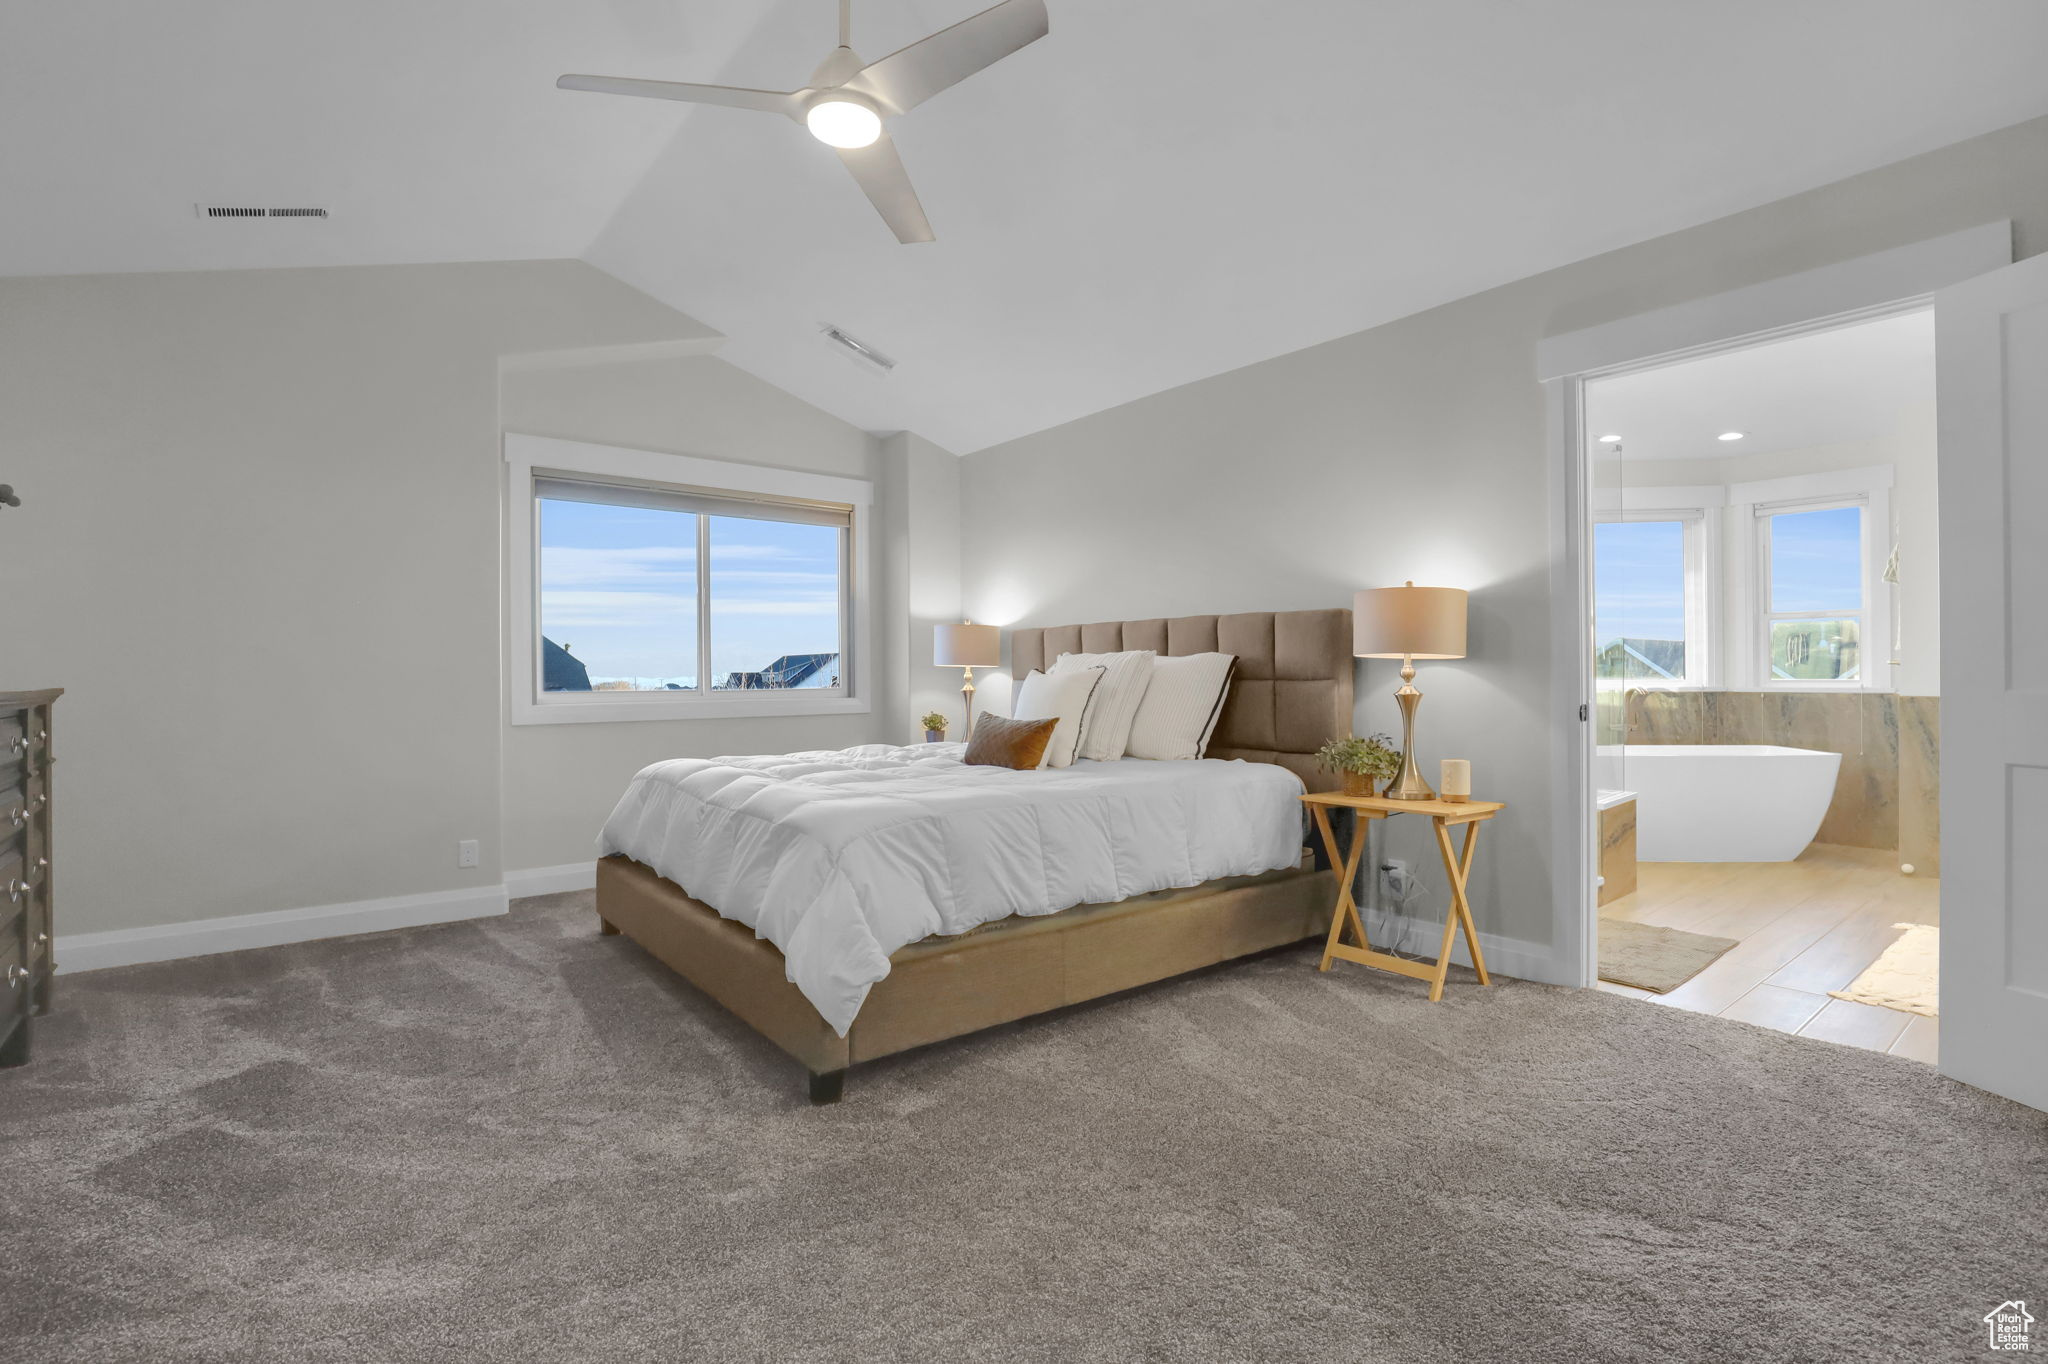 Bedroom with light colored carpet, ensuite bath, lofted ceiling, and ceiling fan